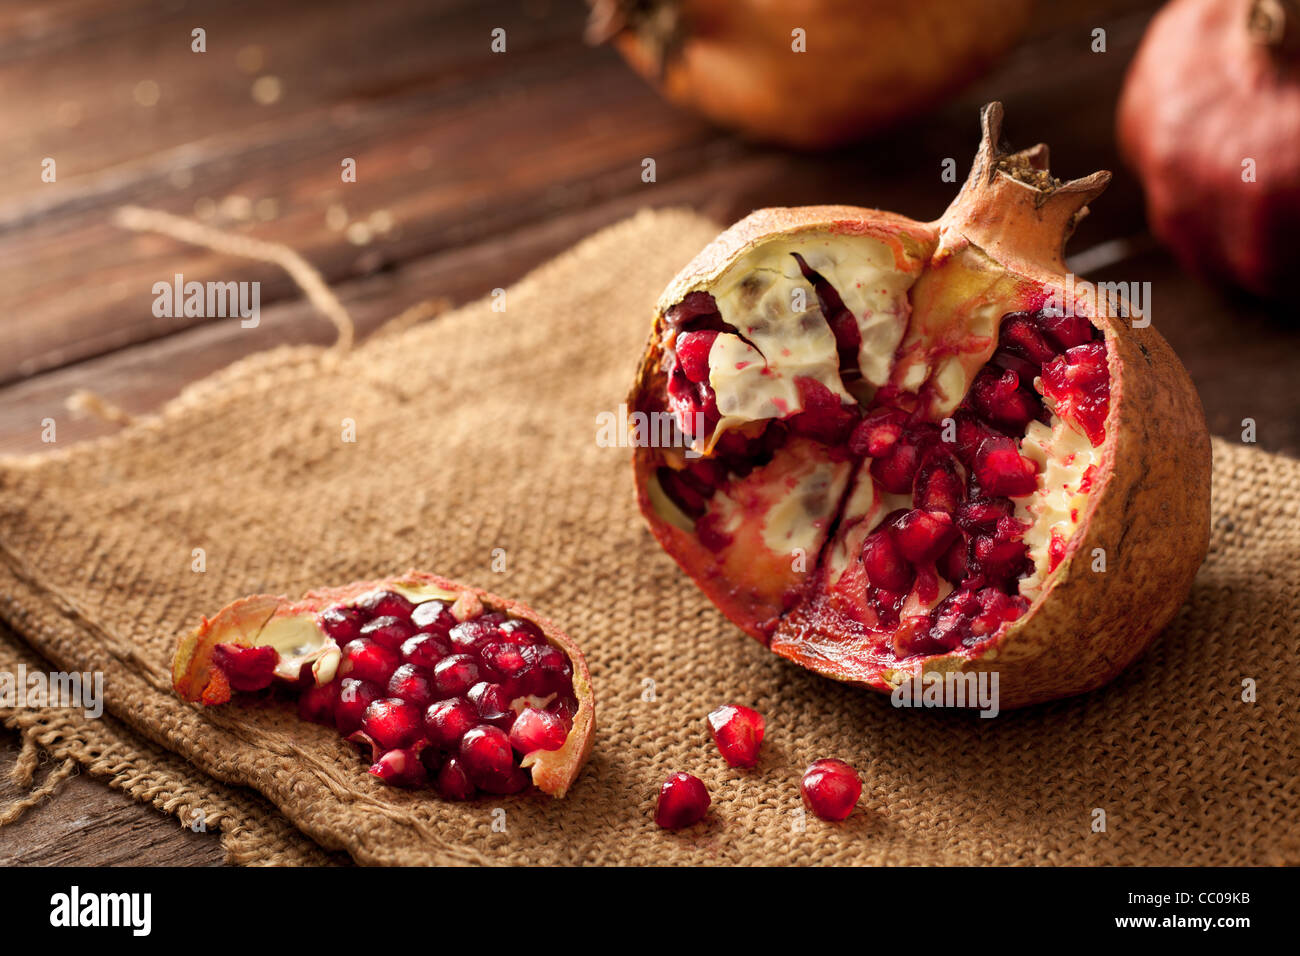 Pomegranate with Seeds on Jute and Wood Stock Photo